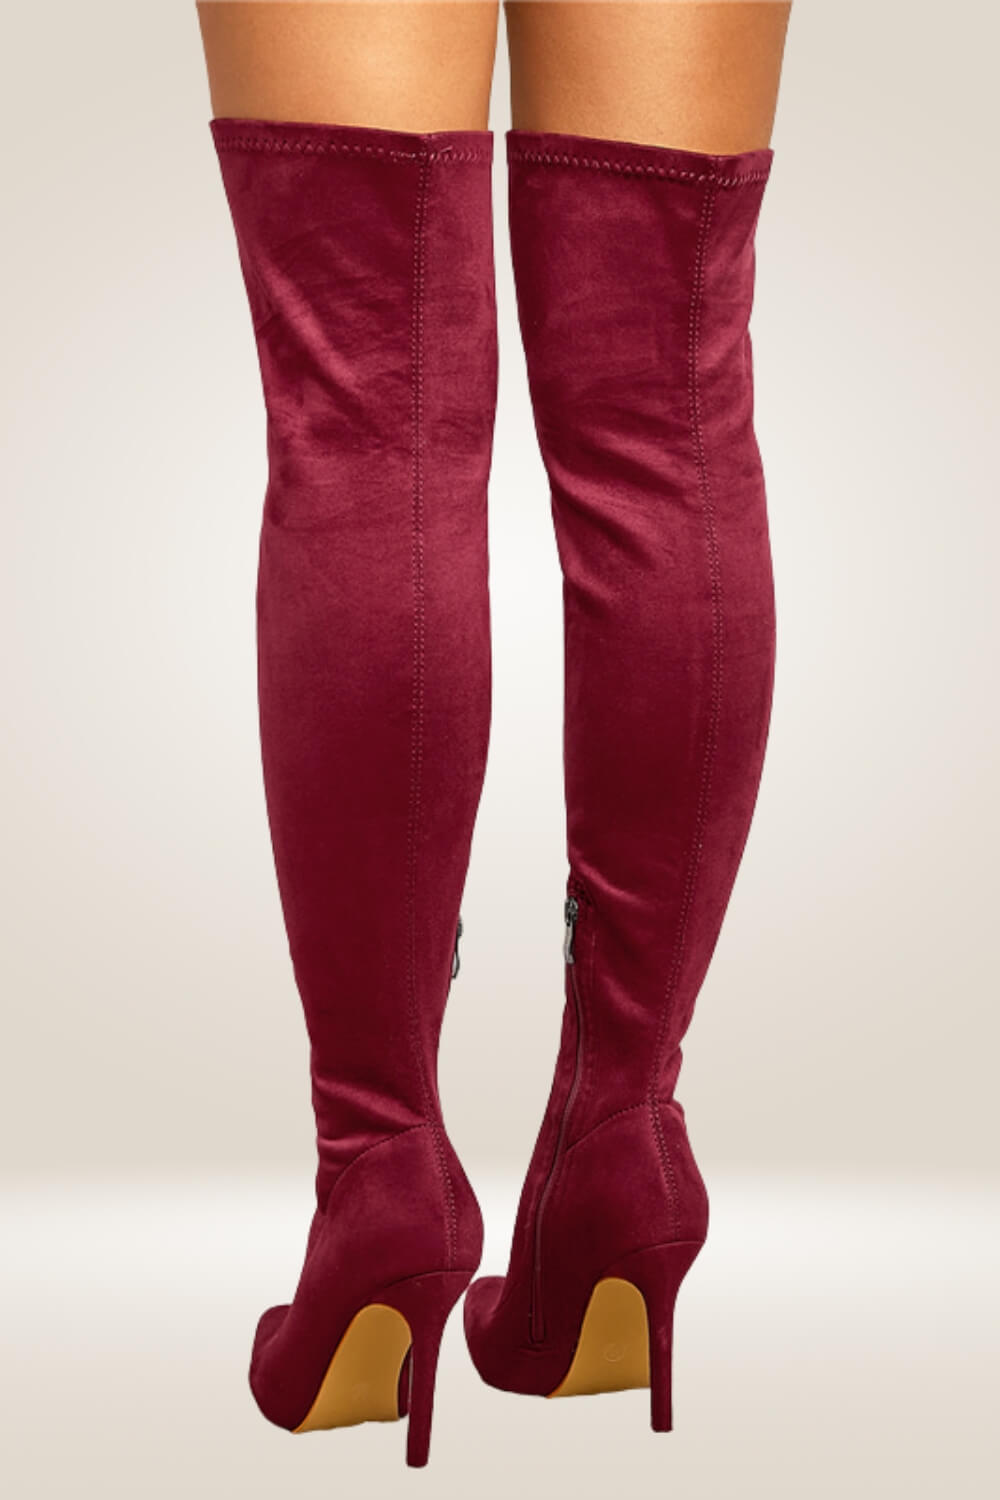 High Heel Wine Red Over The Knee Boots - TGC Boutique - Boots